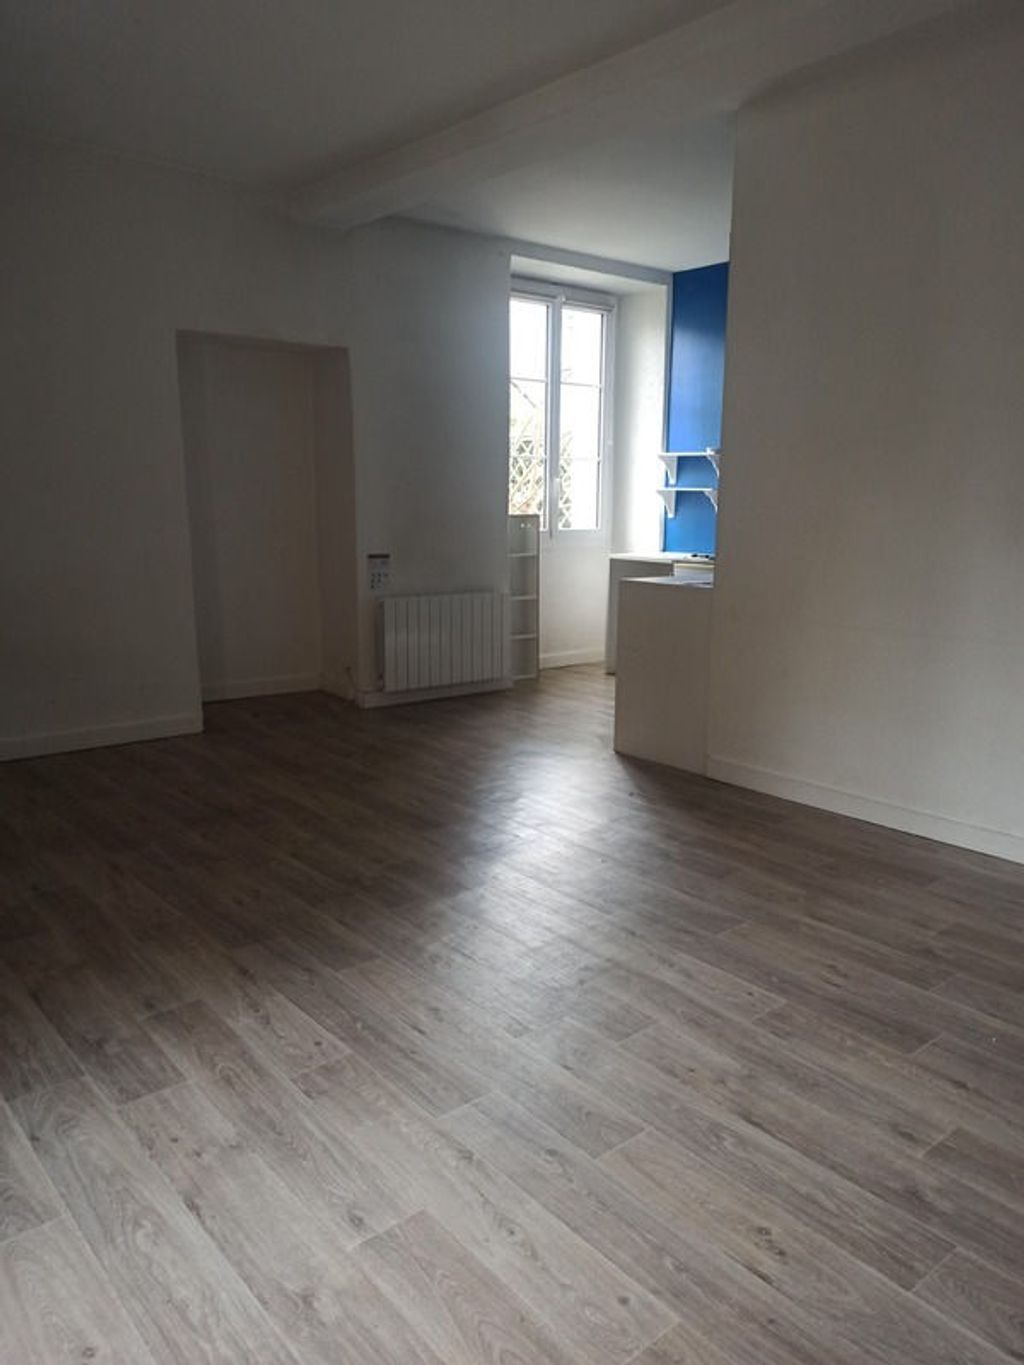 Achat appartement 1 pièce(s) Angers